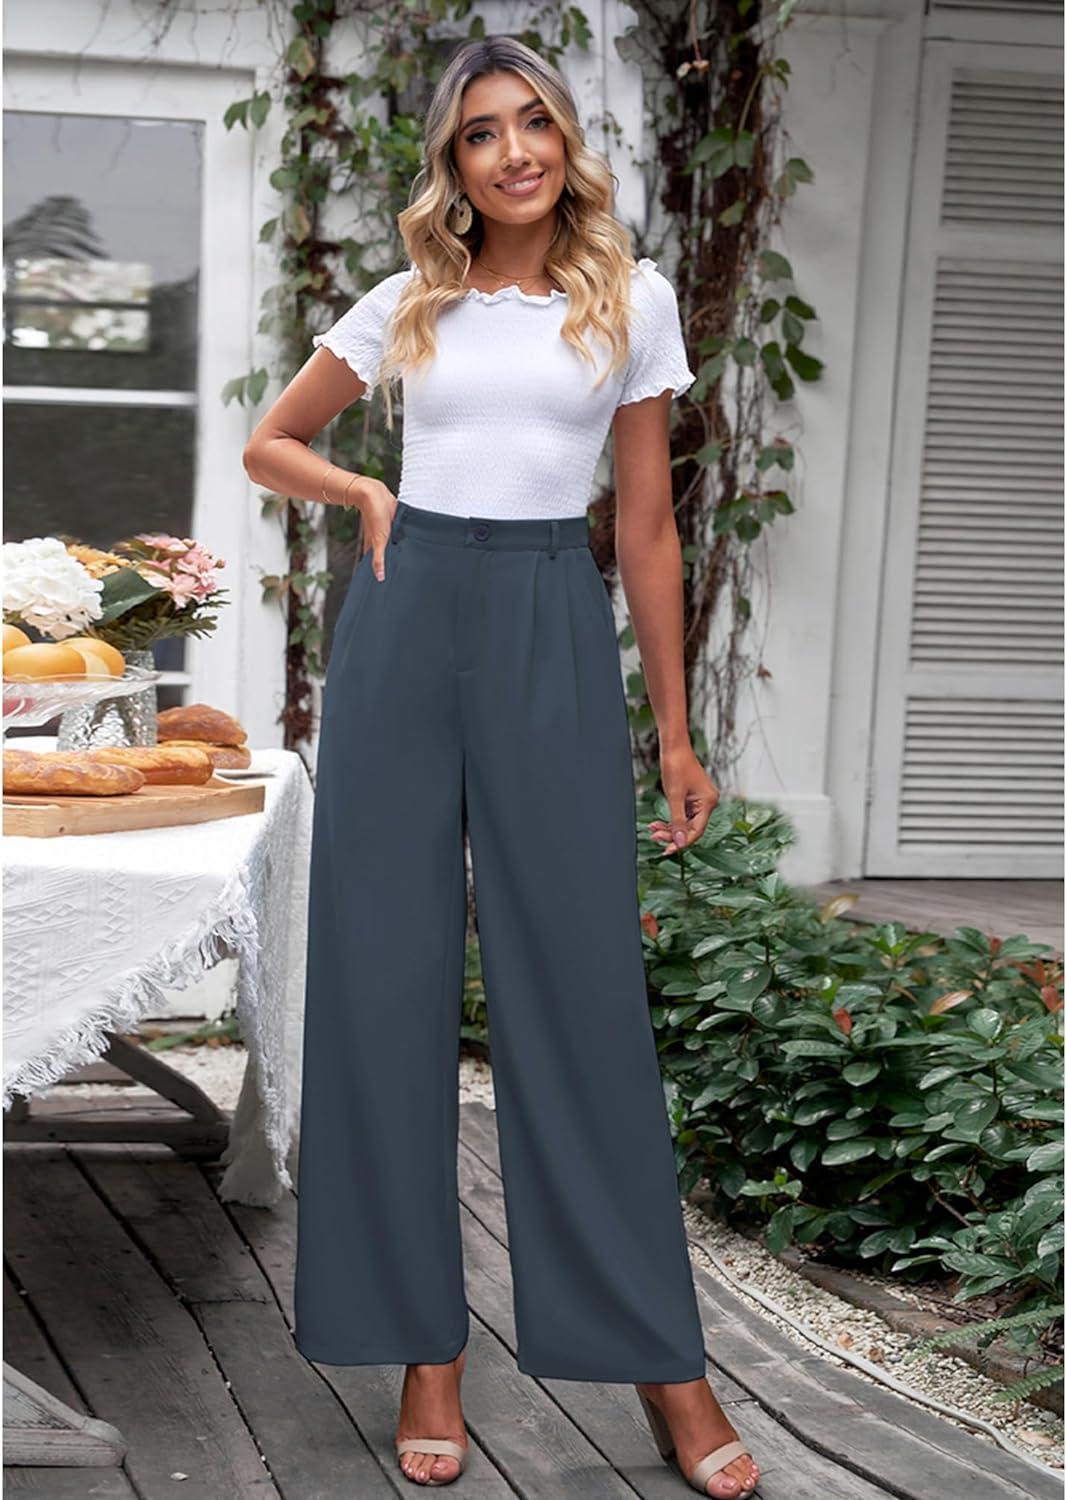 Women's Pants & Trousers  Wide Leg, Tailored and Casual Styles